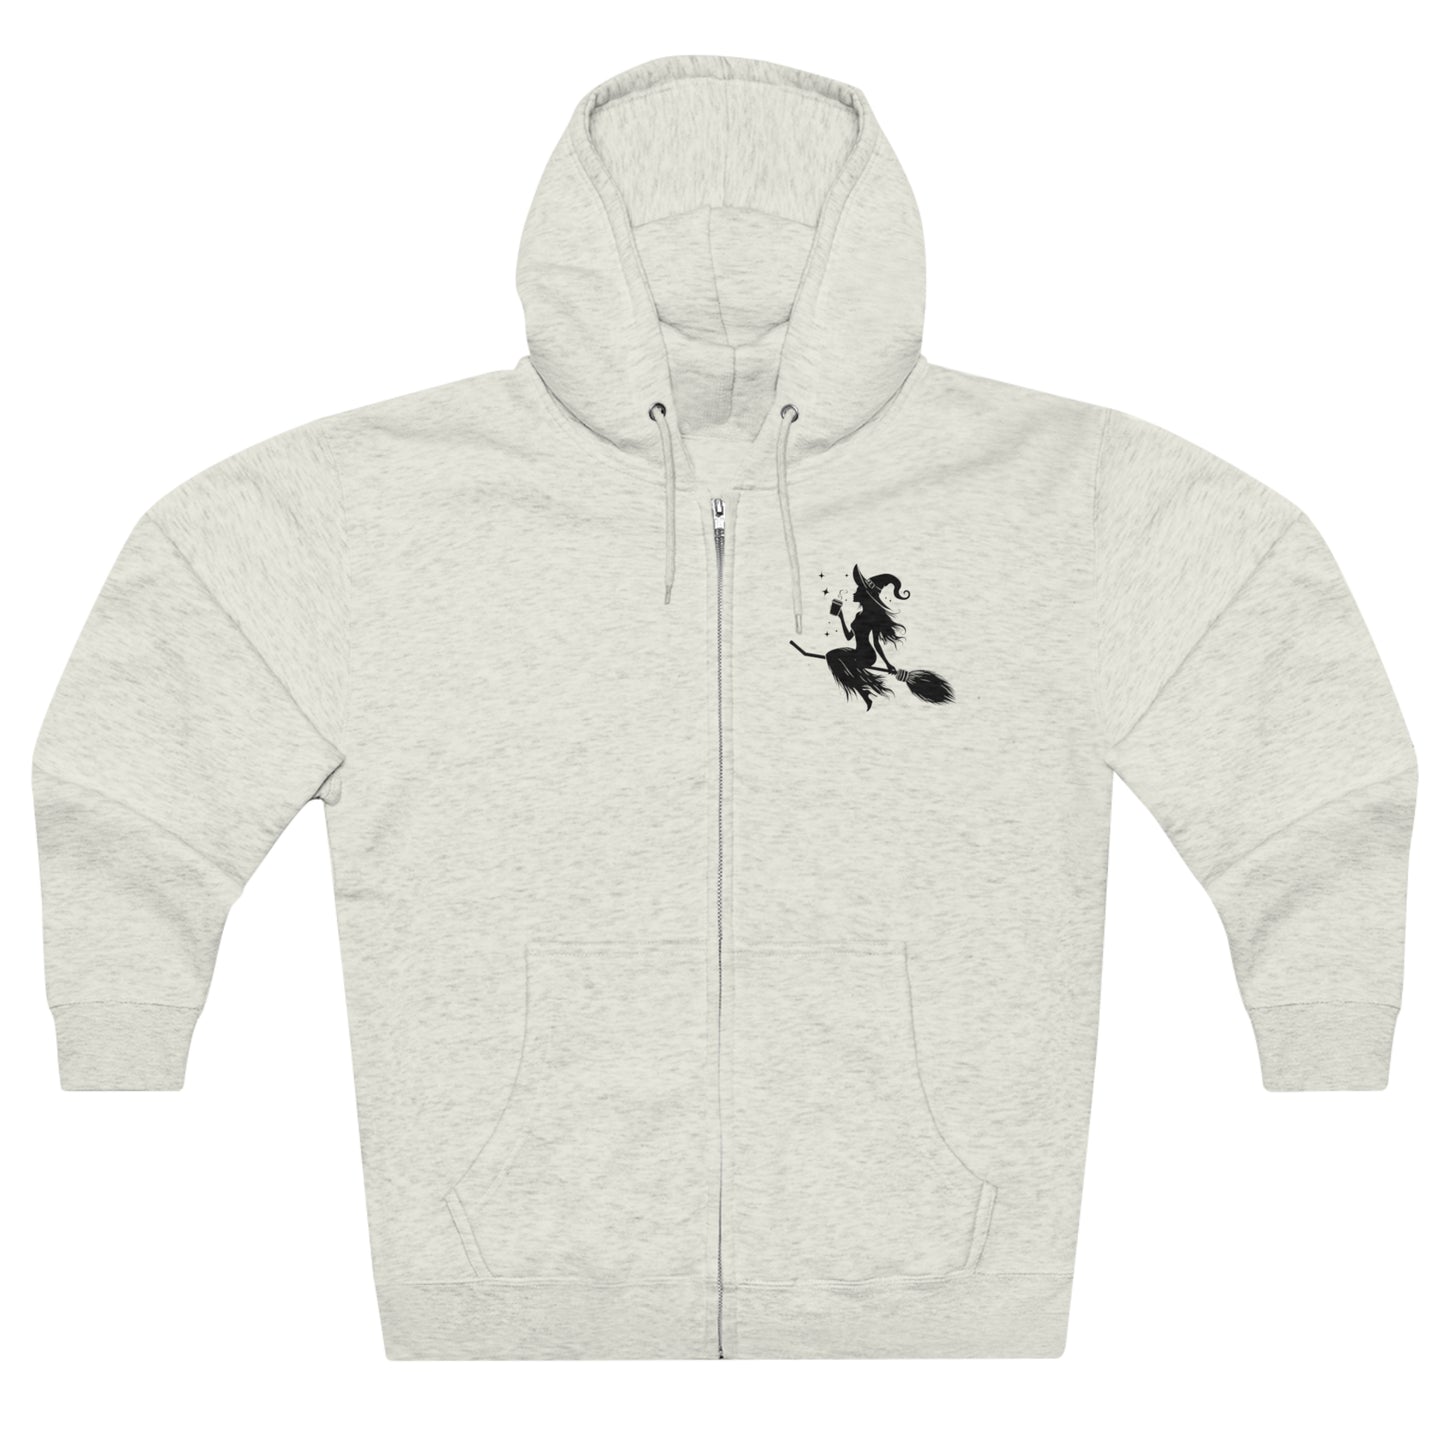 Hoodie: featuring a witch flying with a coffee cup, with a moon in the background. Oatmeal color Hoodie with Black graphics on the front chest, and back.